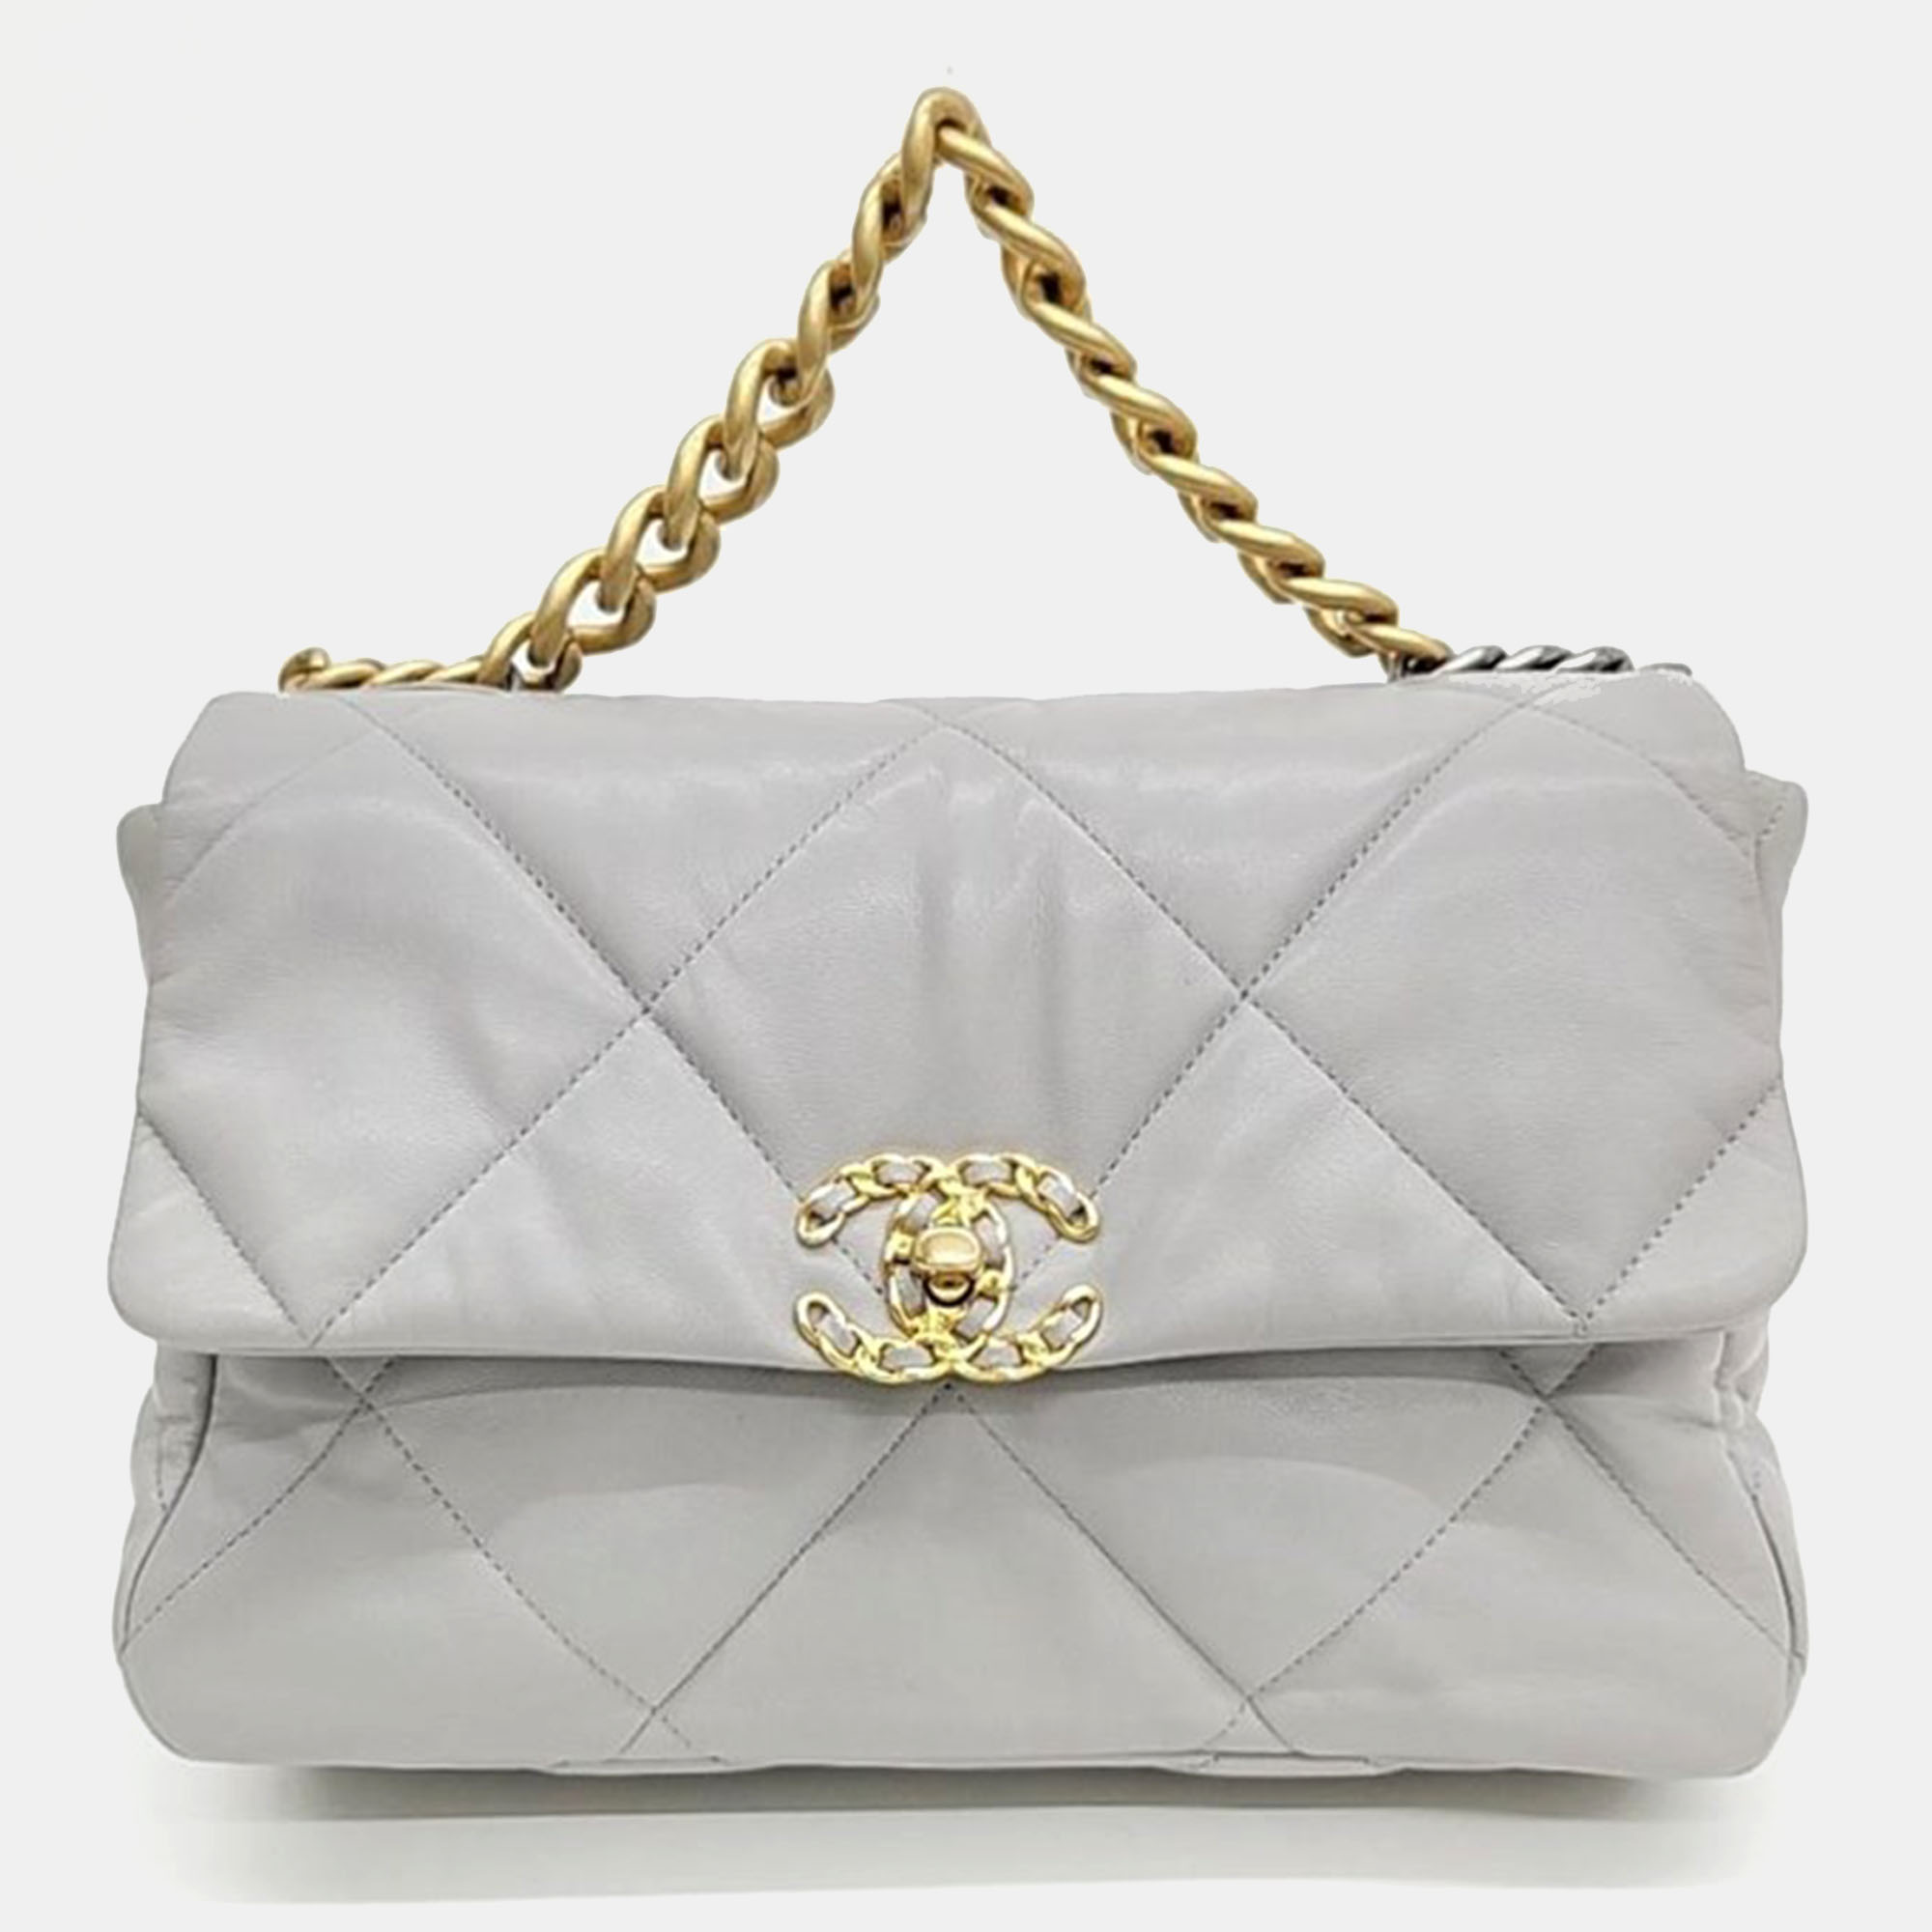 Chanel grey leather large 19 flap bag